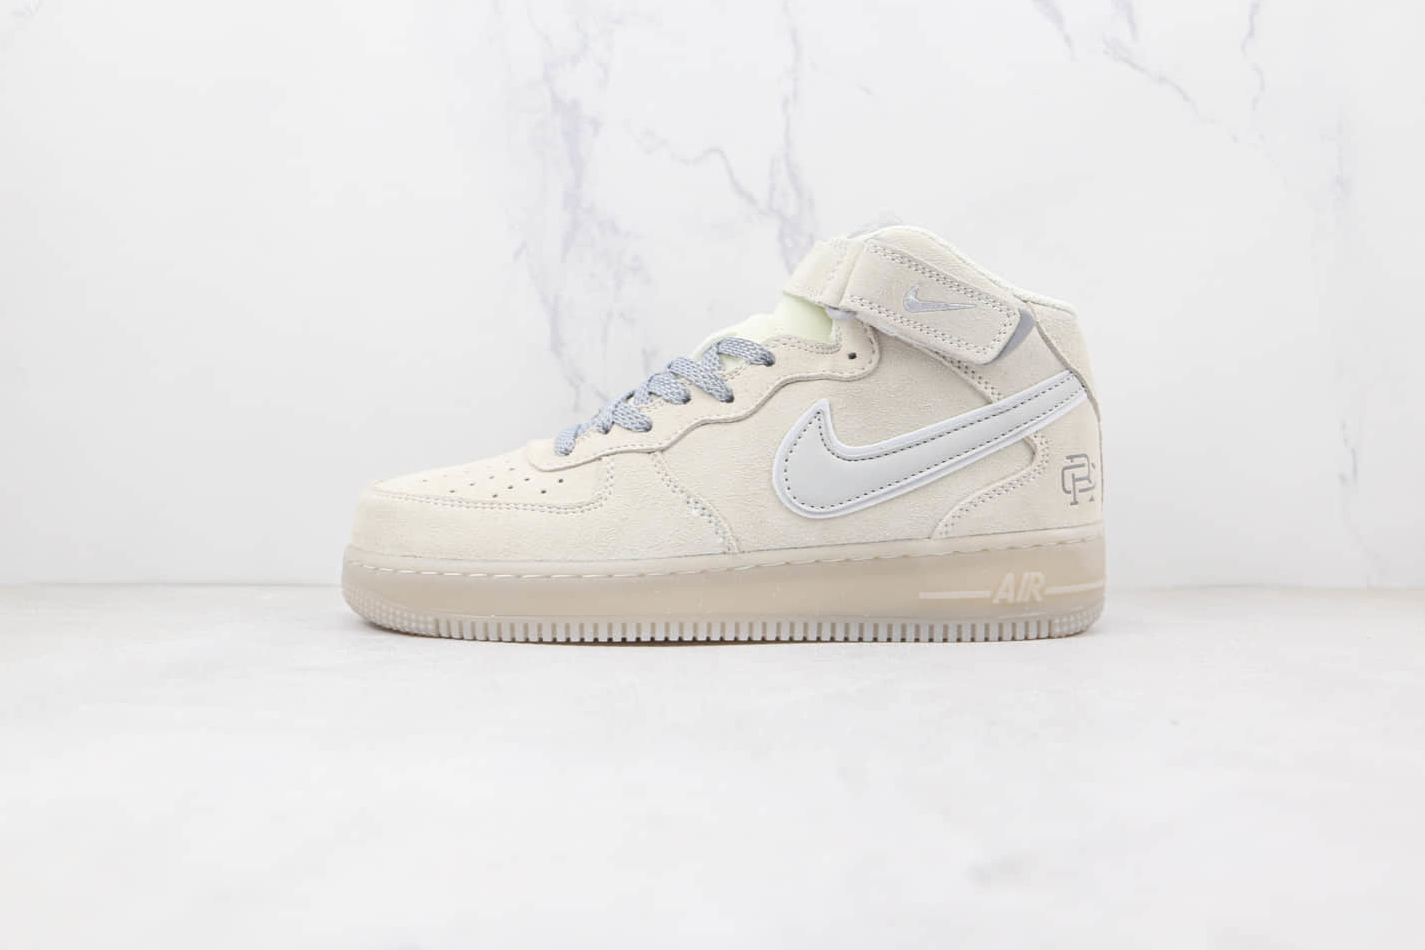 Reigning Champ x Nike Air Force 1 07 Mid Brown Light Grey - GB0902-112 | Limited Edition Collab!